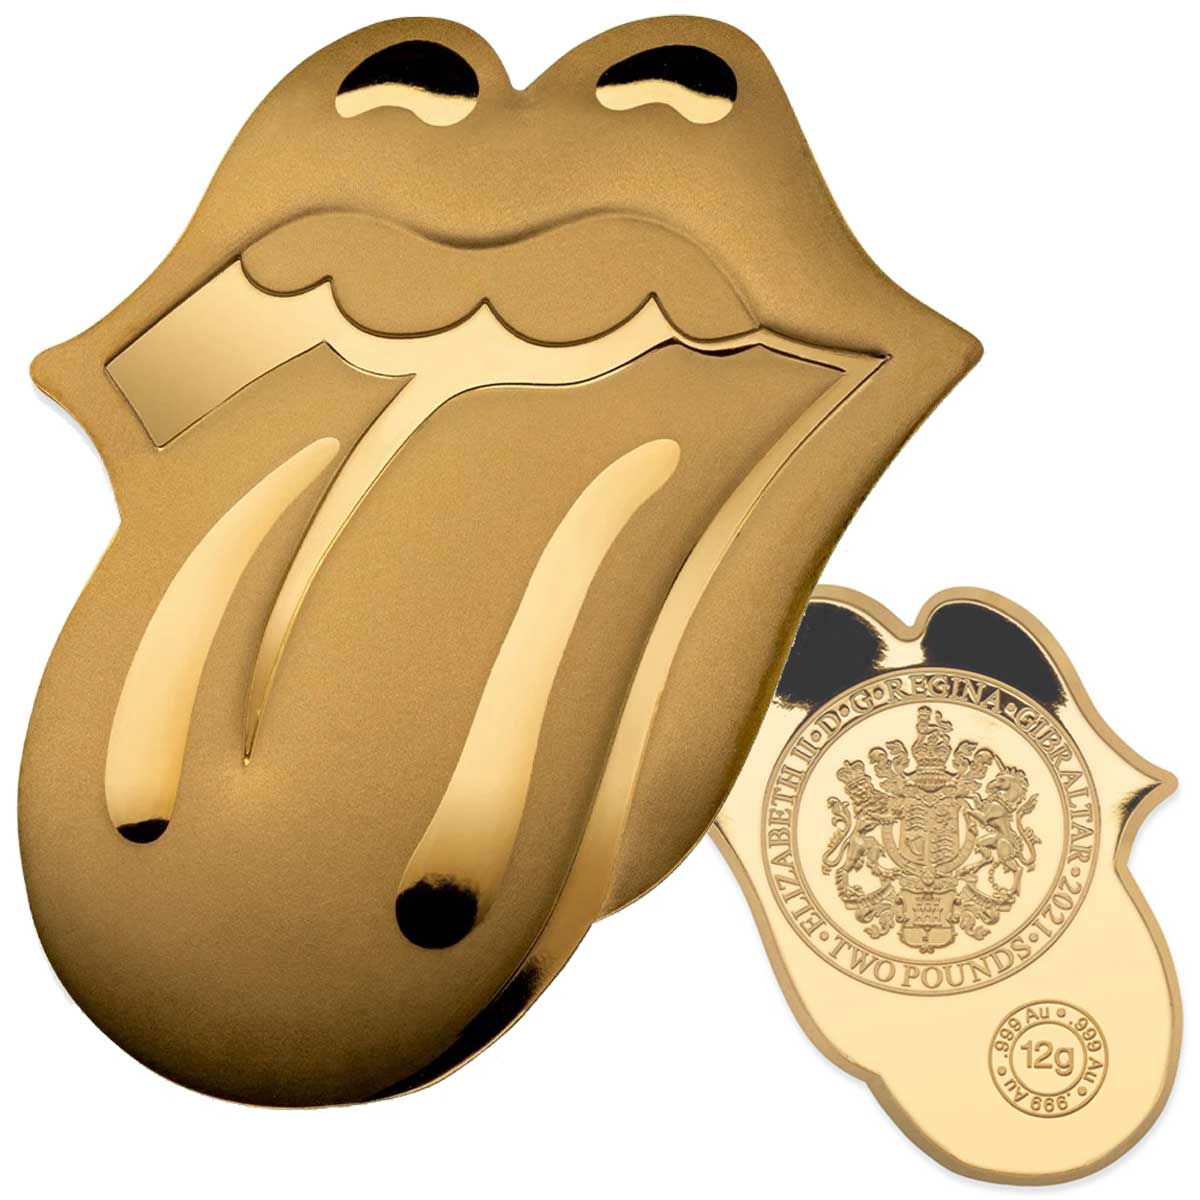 The Rolling Stones get their own coins including a coloured silver